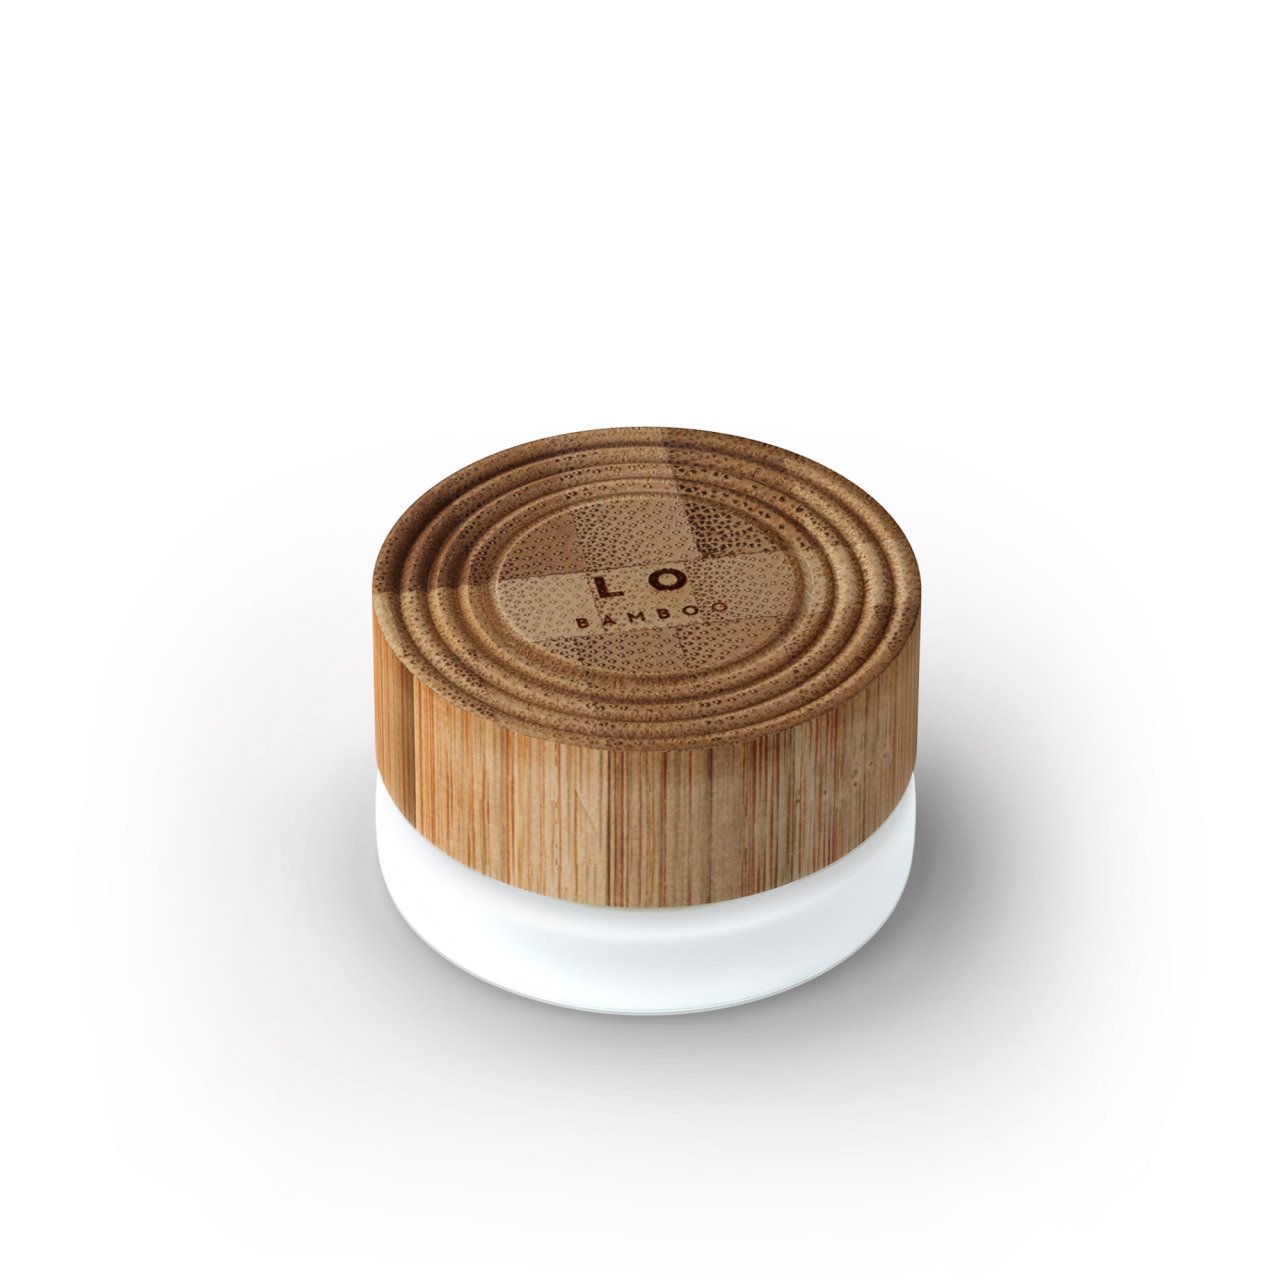 BAMBOO • LO Care • All natural lip care: ingredients & packaging